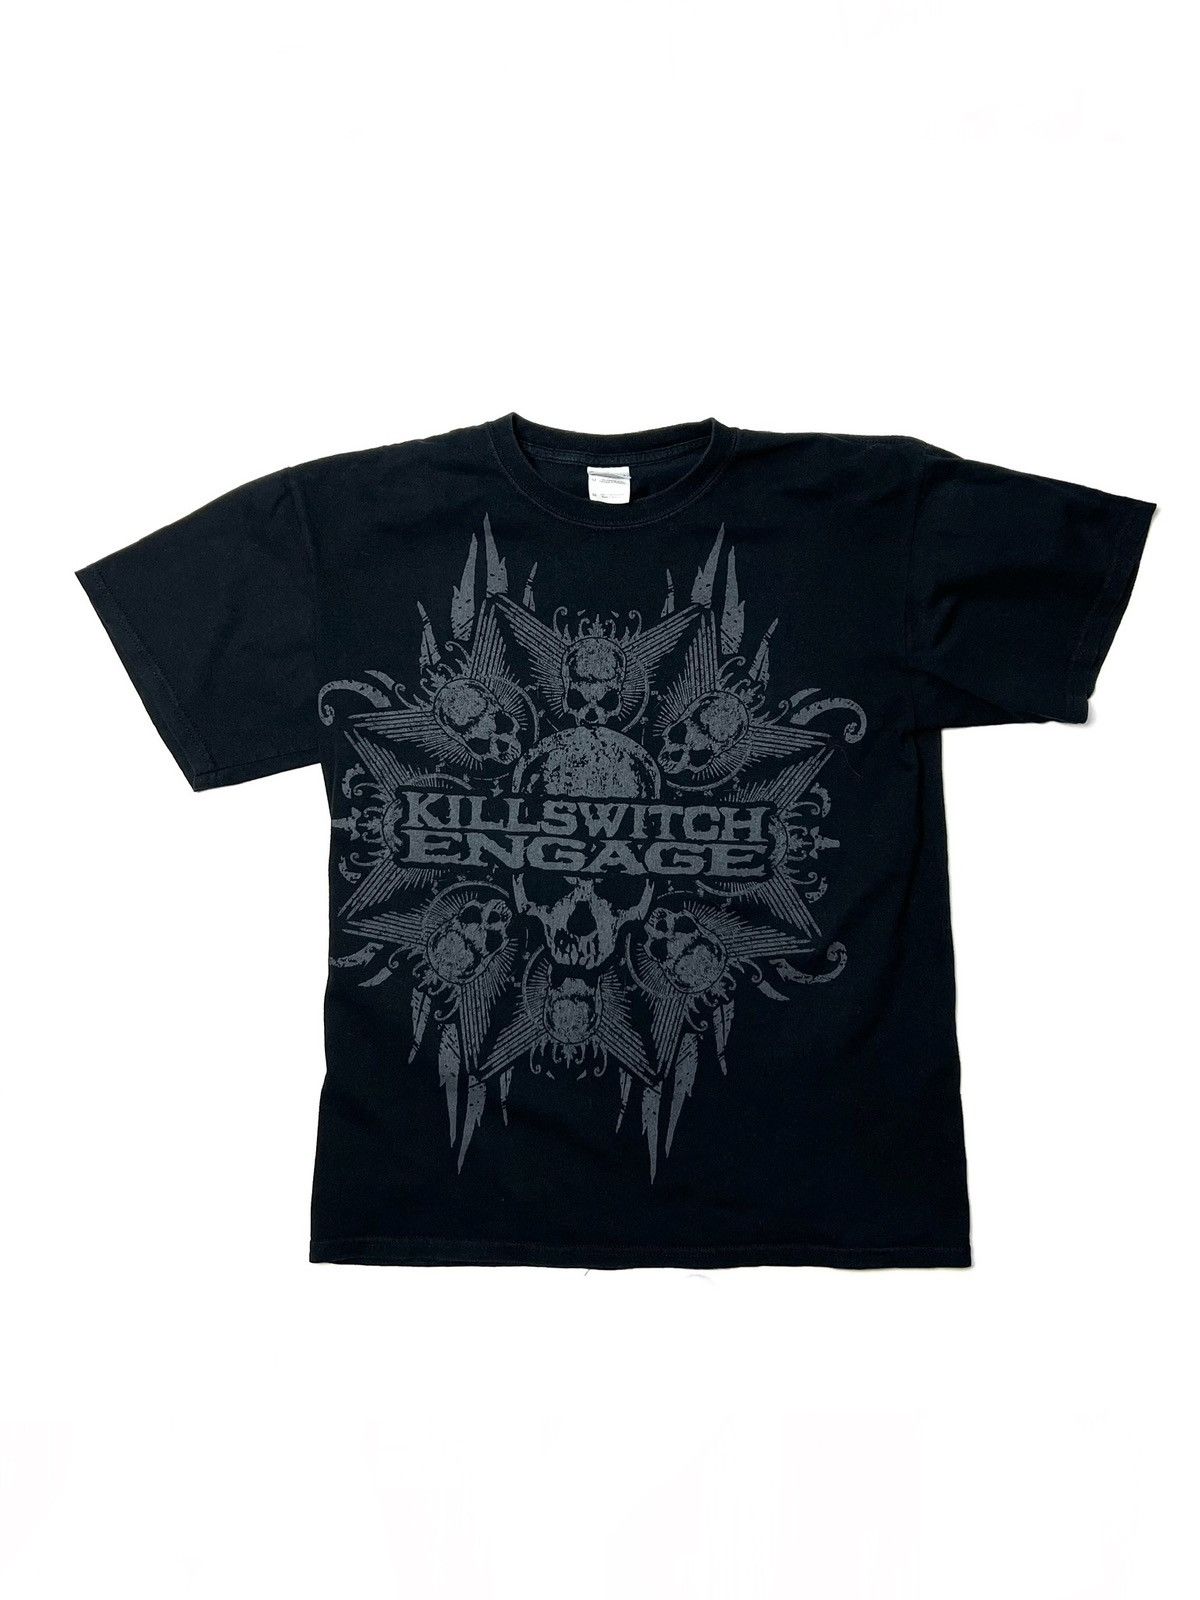 Pre-owned Band Tees X Rock Tees Y2k 00s Killswitch Engage Big Skull Rock Band Logo Tee In Black